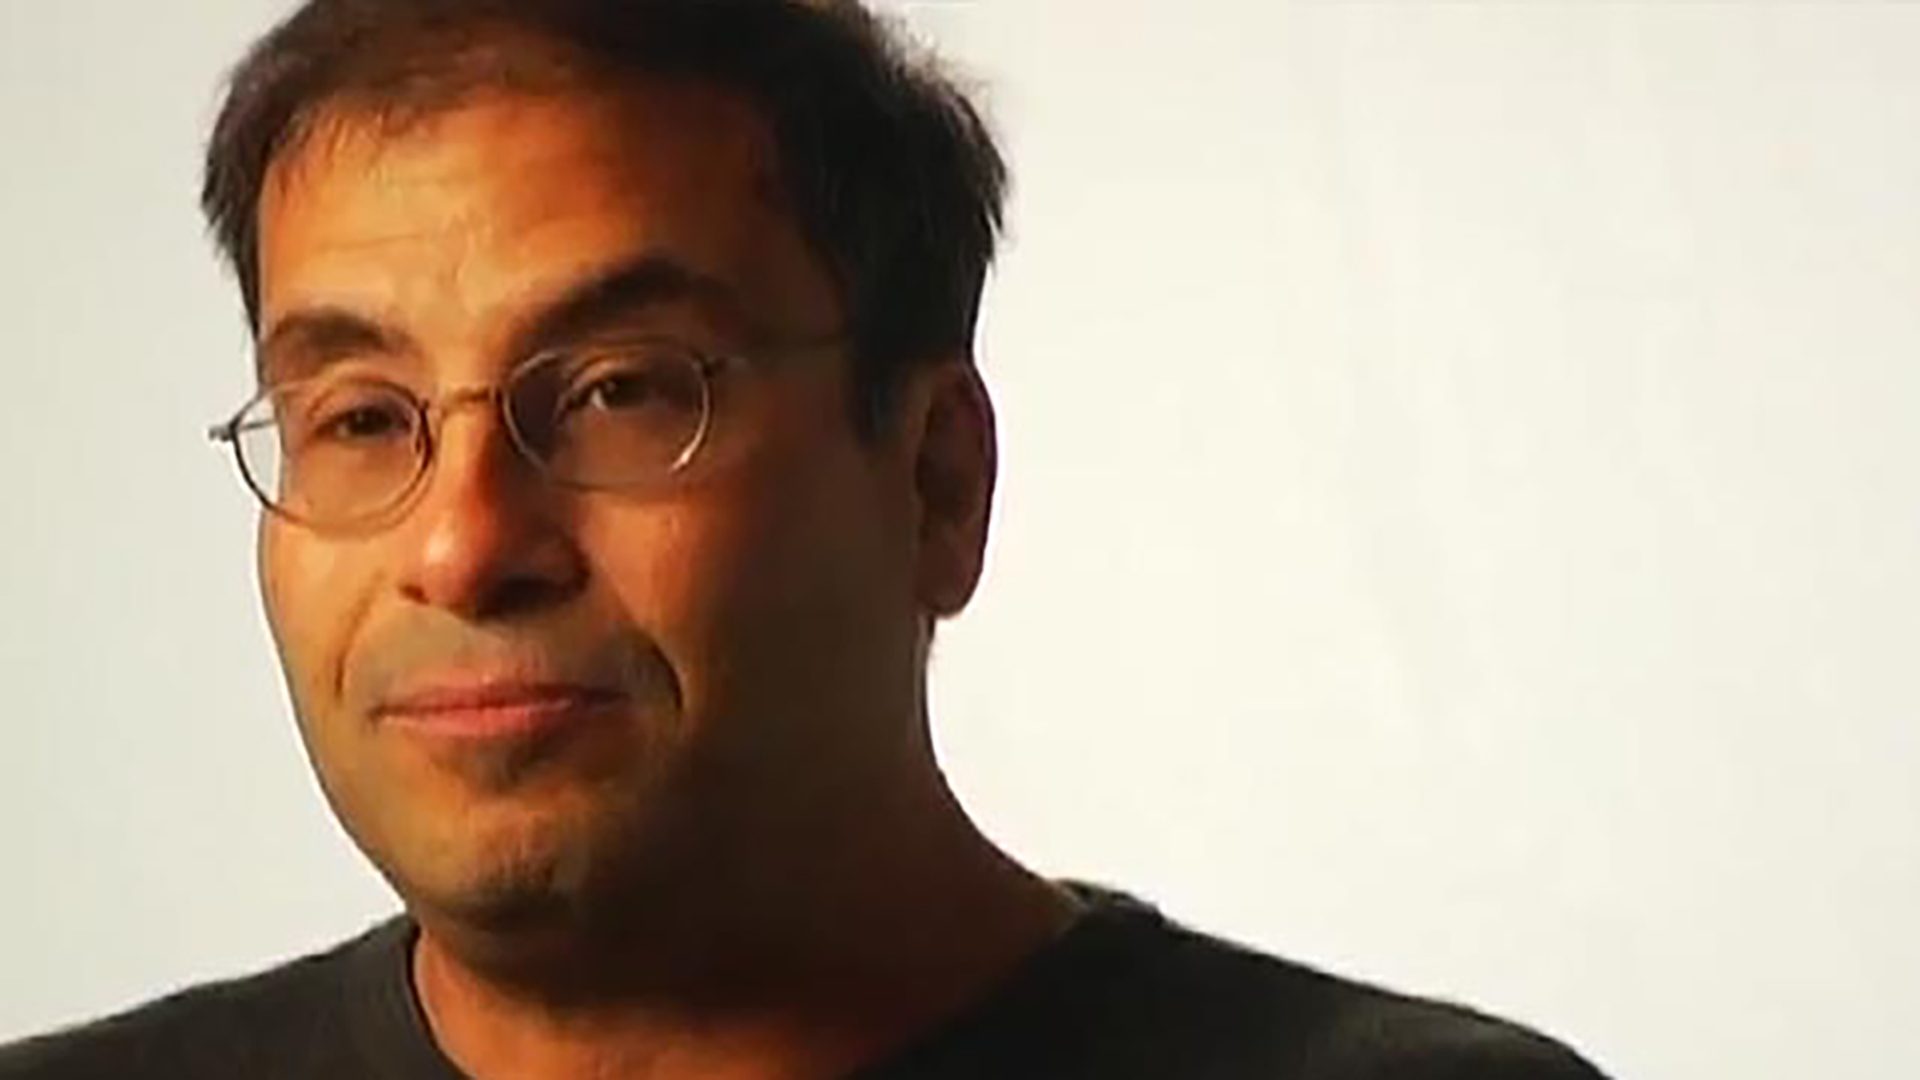 A middle-aged man wearing glasses and a black t-shirt is interviewed against a white background